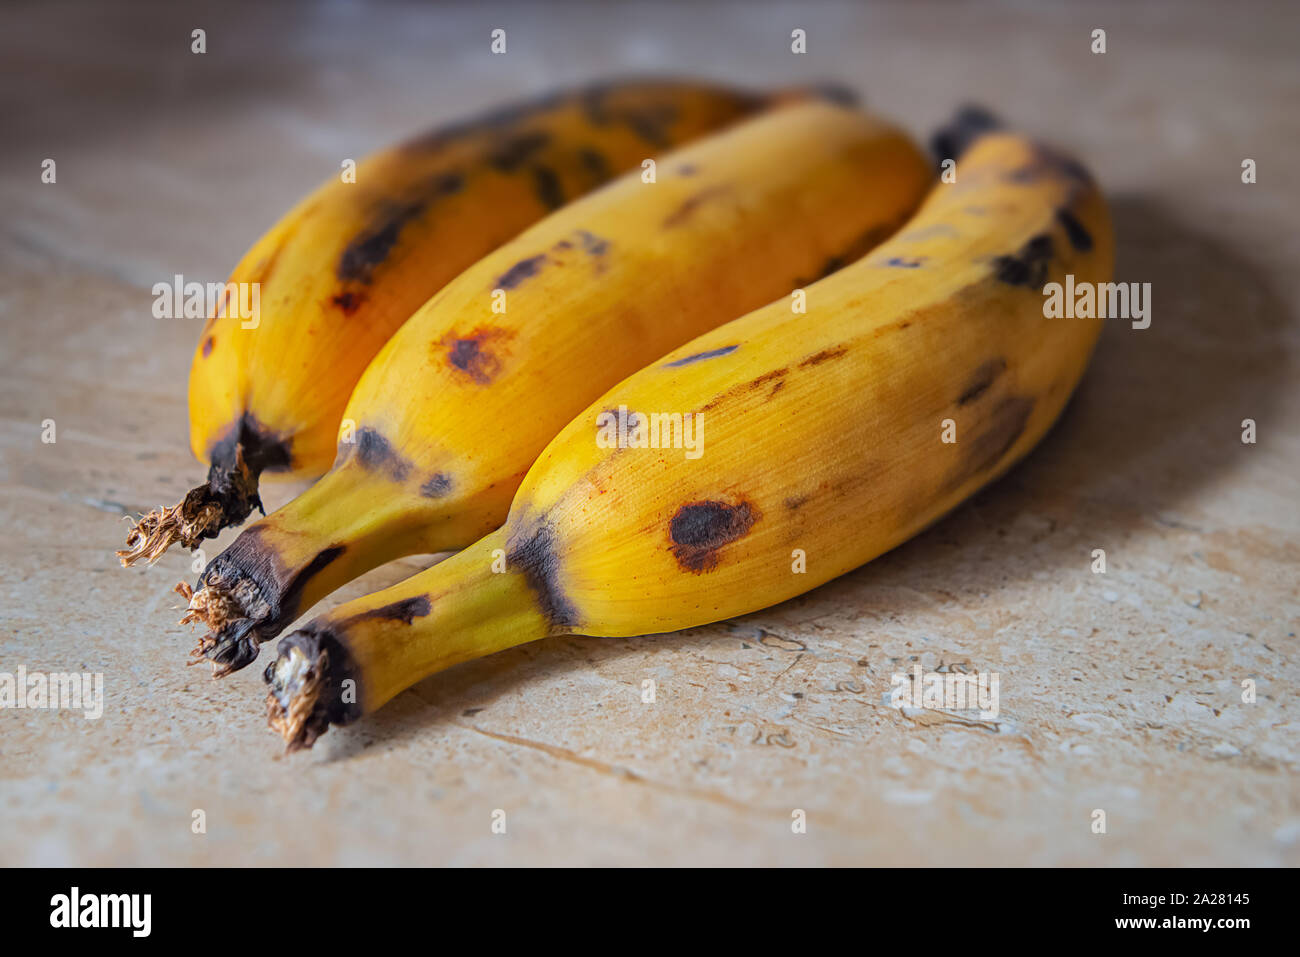 Plantain fruit top kitchen counter ripe two organic raw food close up Stock Photo